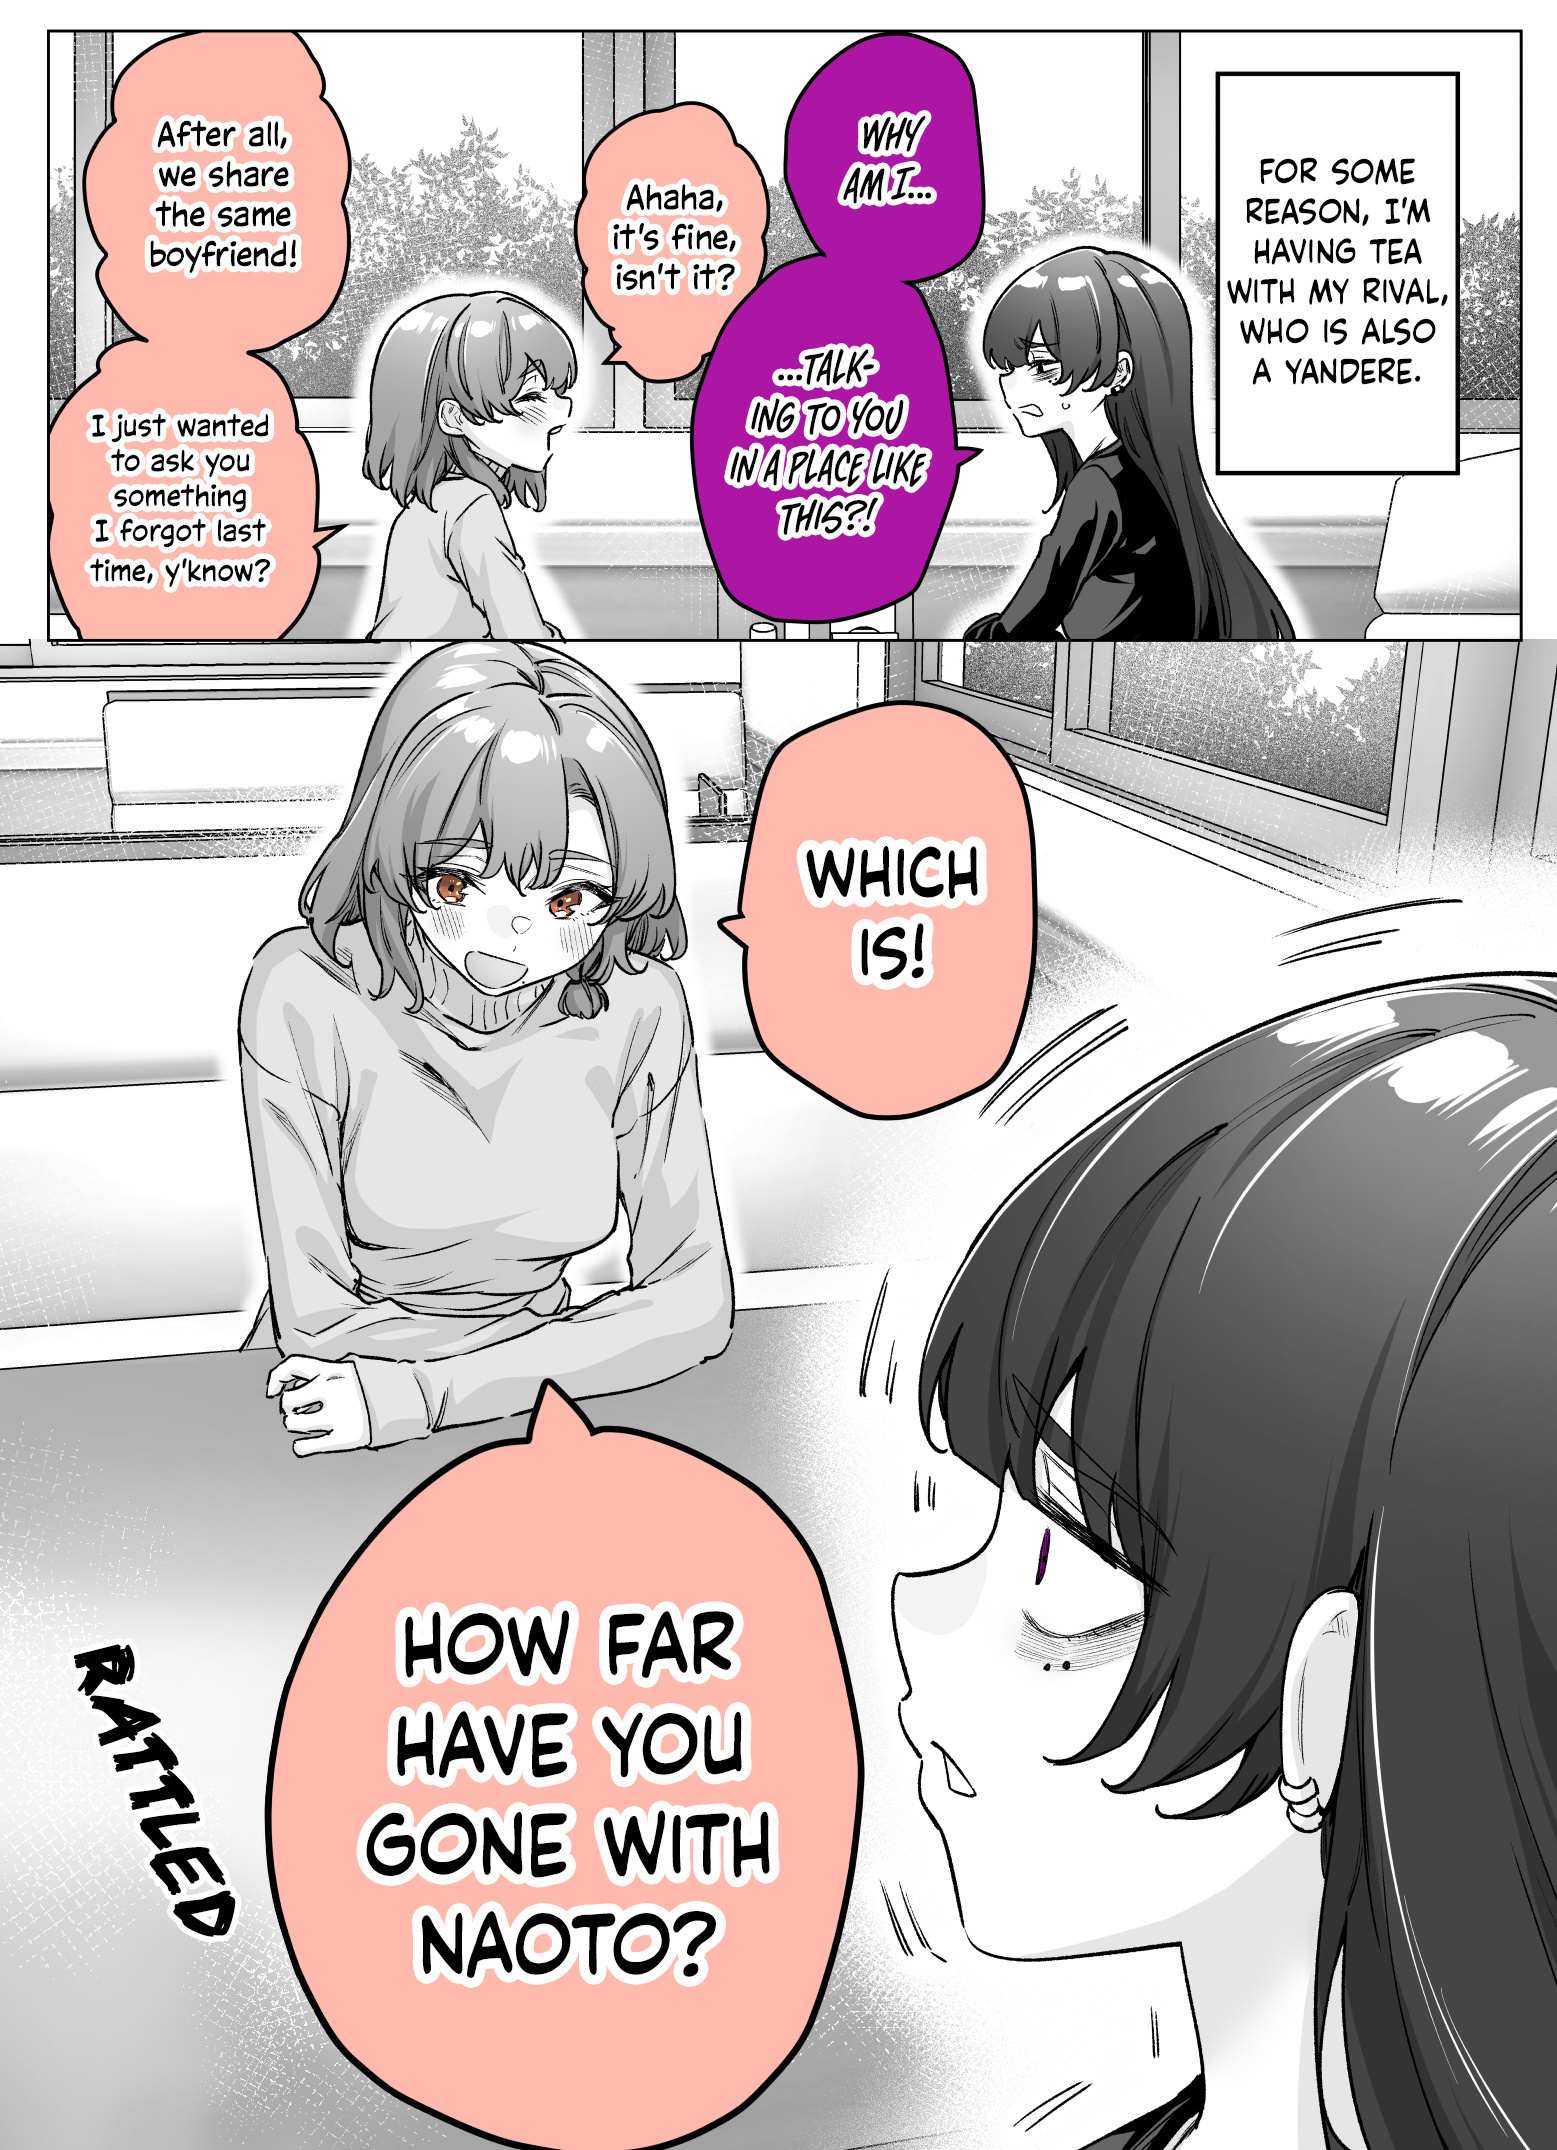 I Thought She Was a Yandere, but Apparently She’s Even Worse - chapter 41 - #1